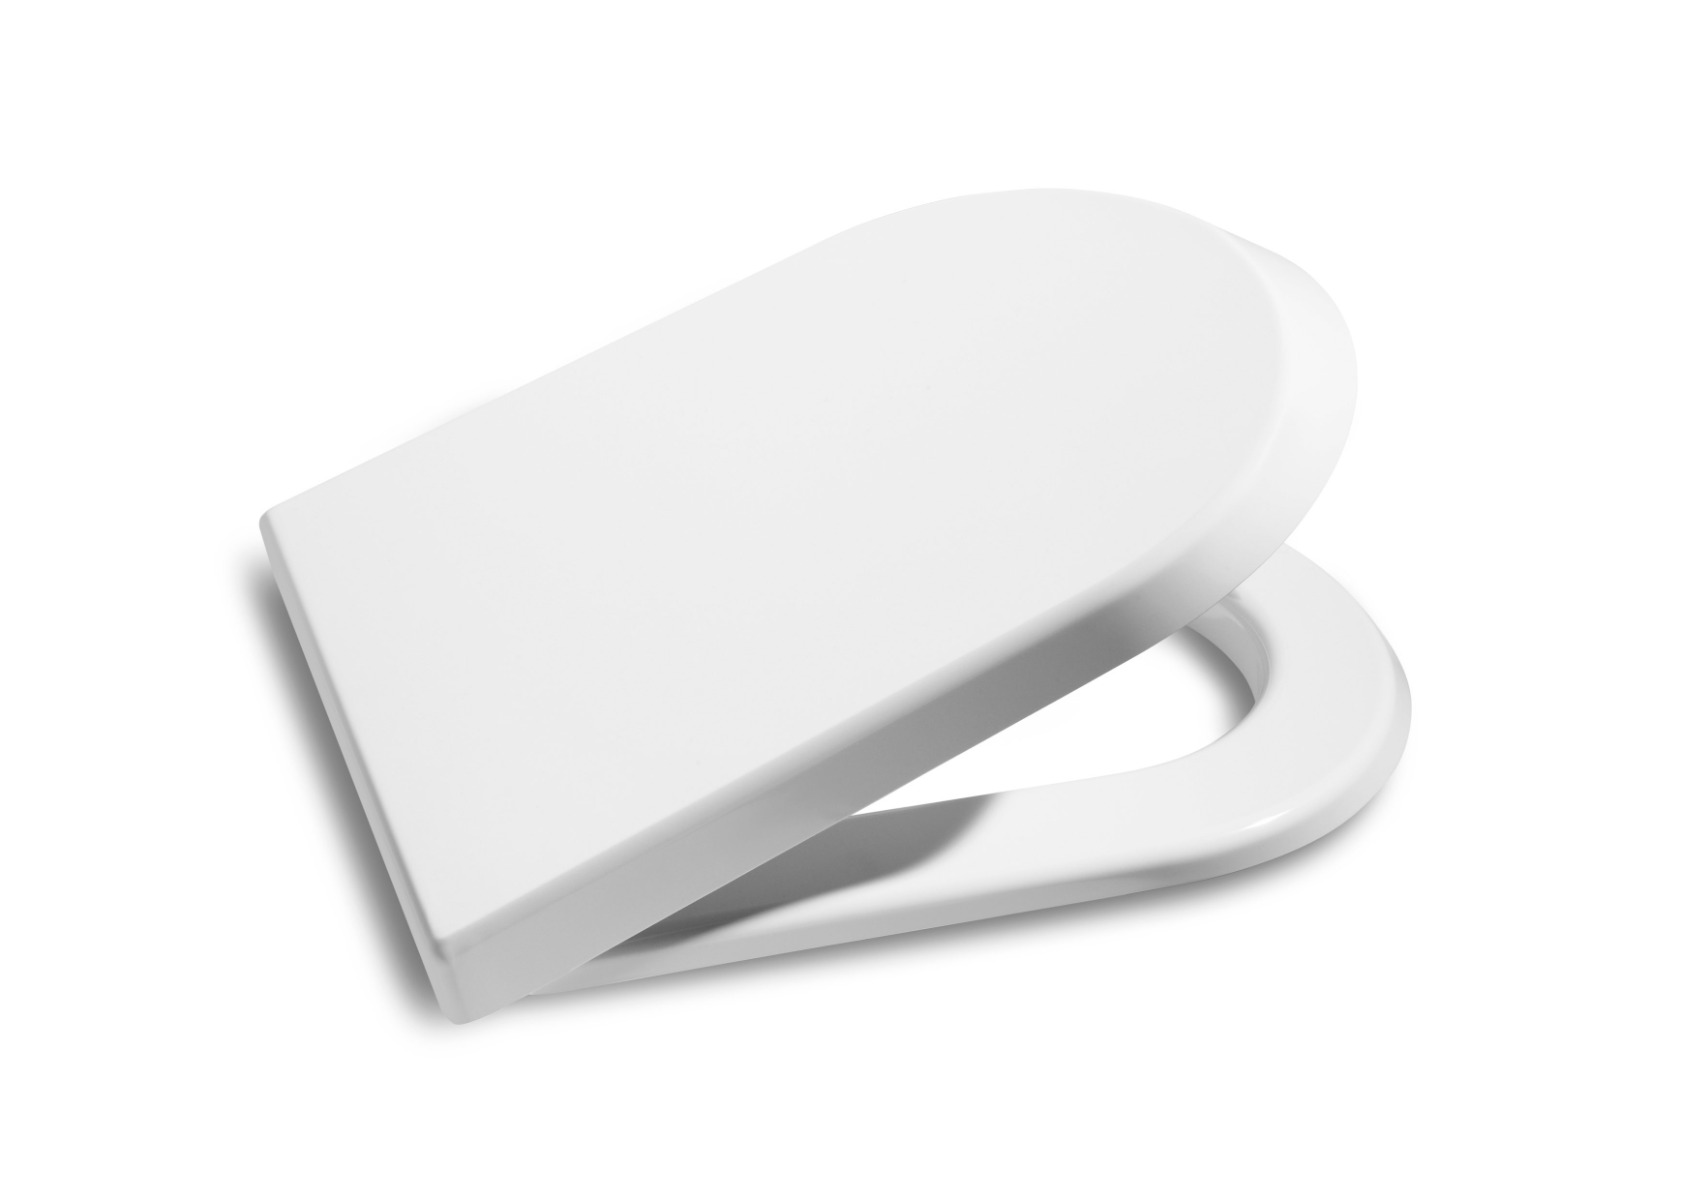  Z80164B004 Soft-closing toilet seat and cover